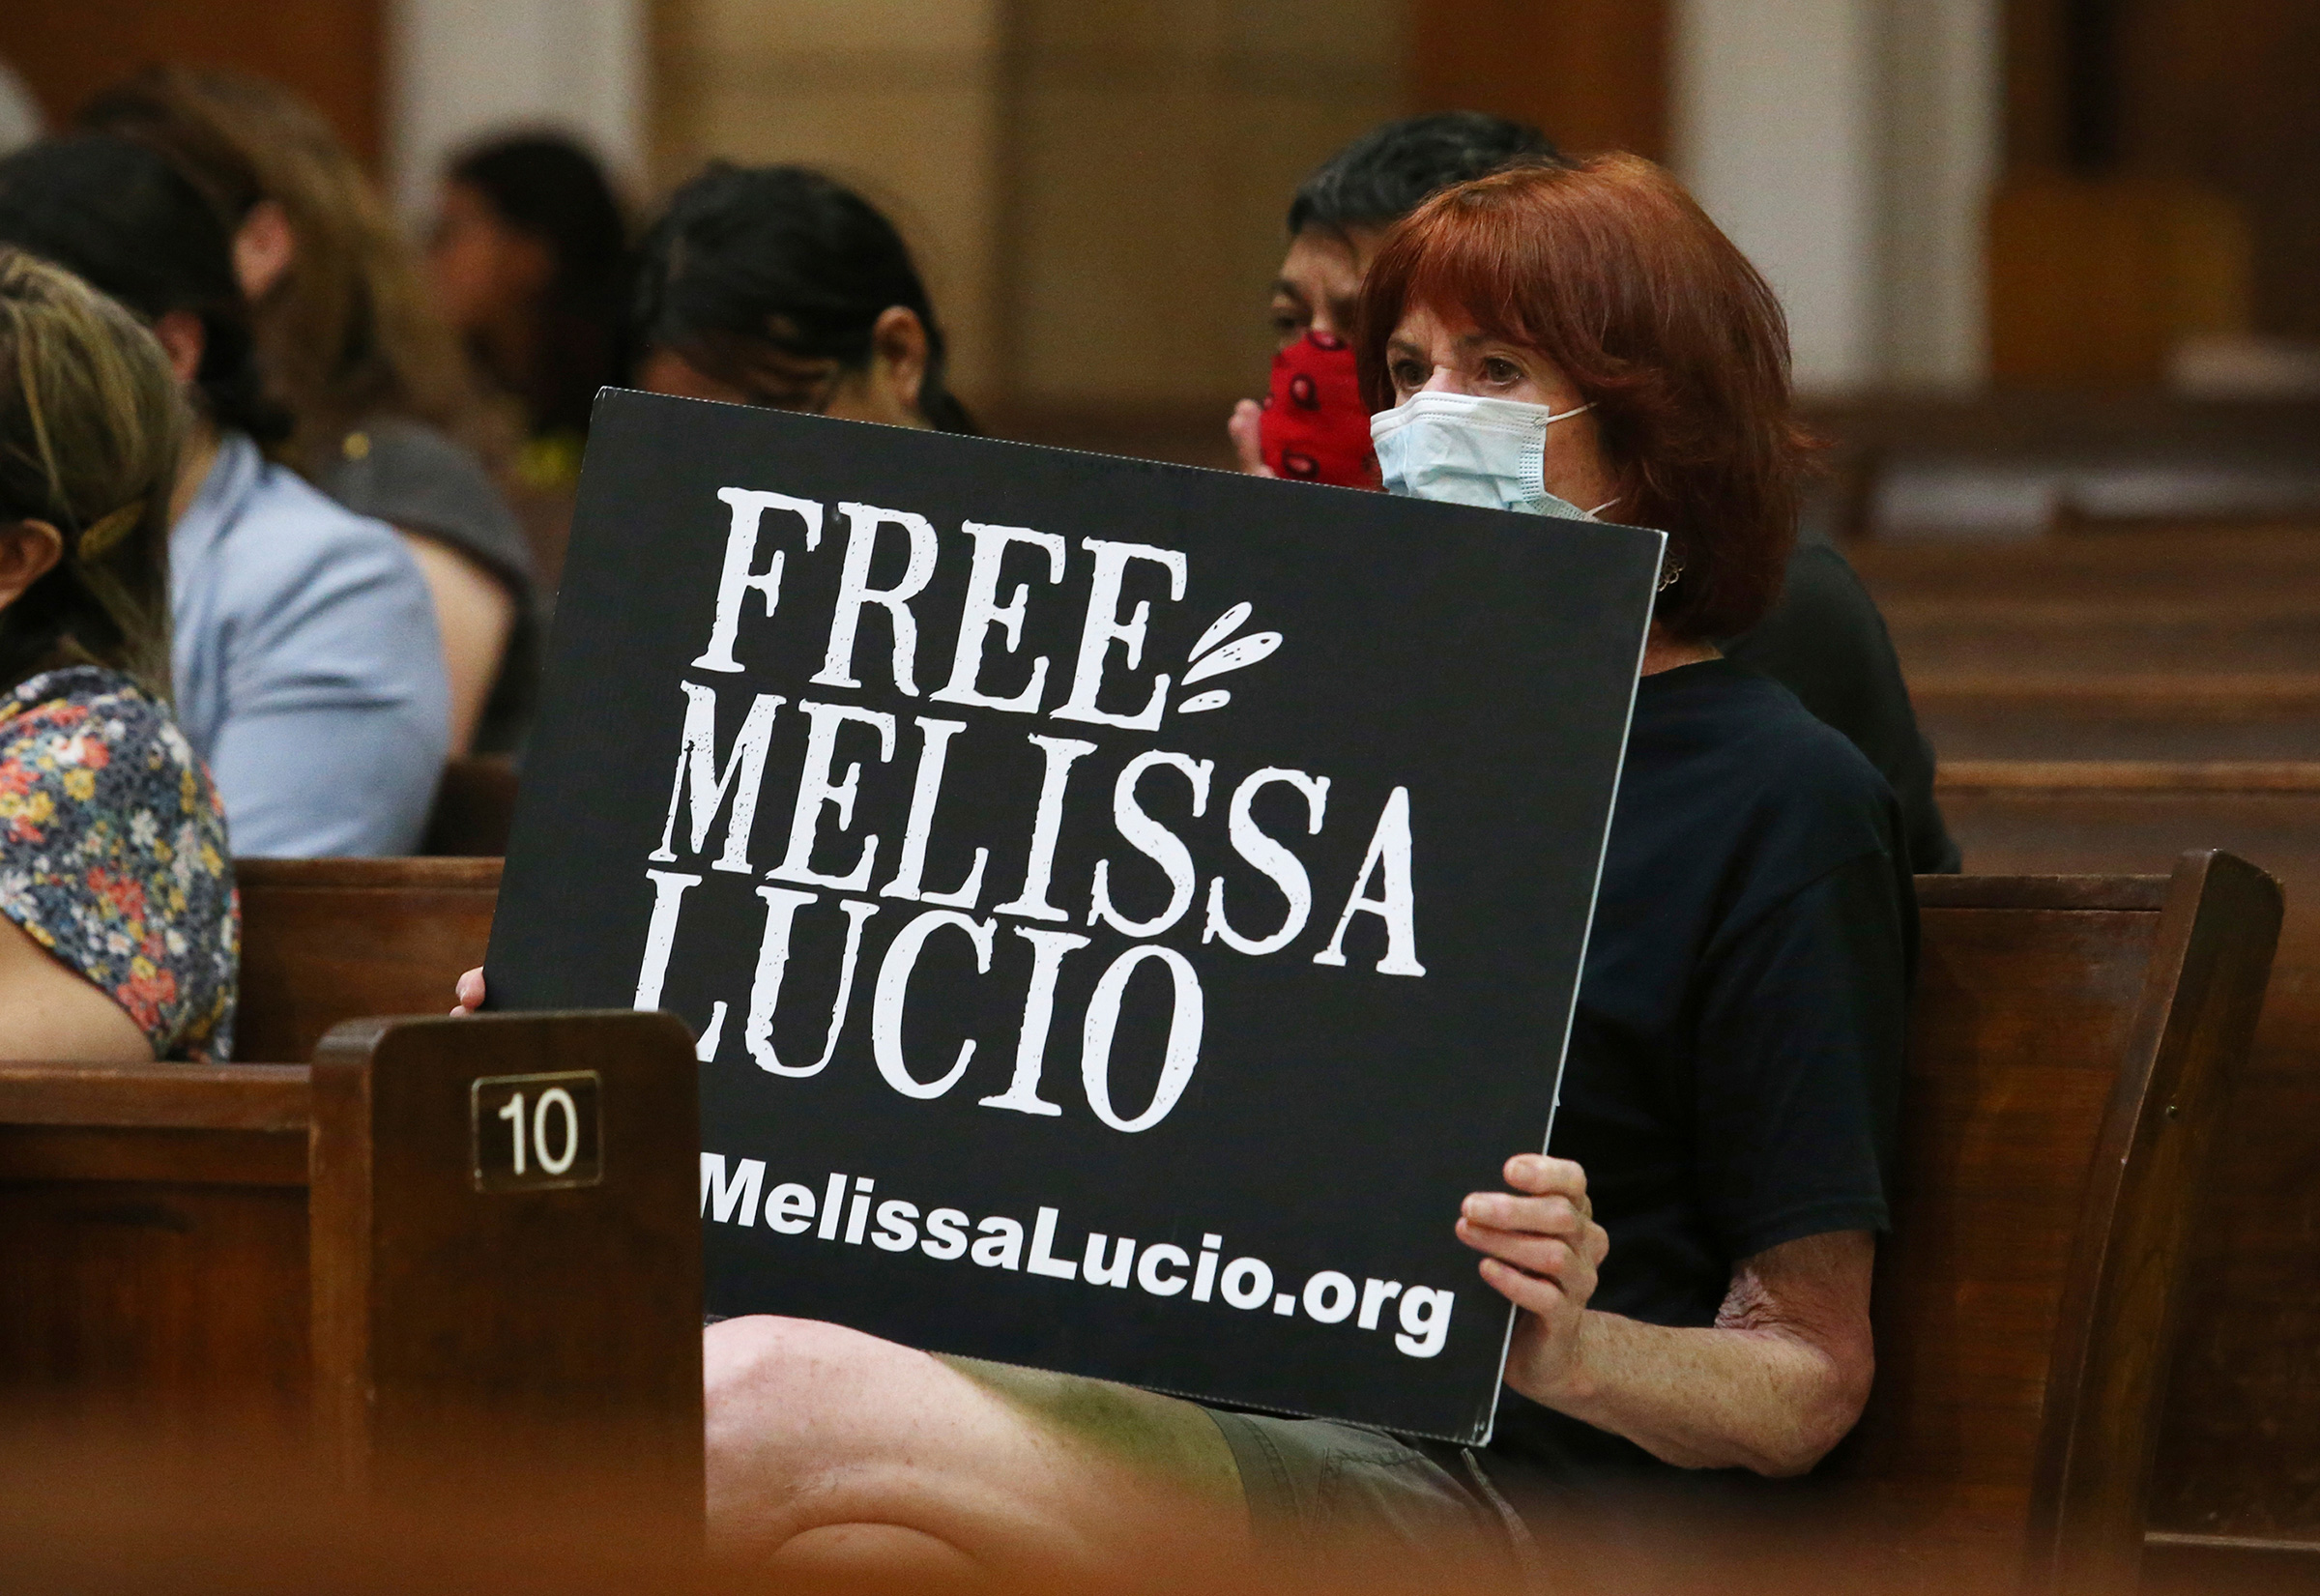 Rachelle Zoca attend a vigil for Melissa Lucio at the Basilica Of Our Lady of San Juan del Valle National Shrine in San Juan, Texas, on April 22, 2022. (Delcia Lopez—The Monitor/AP)